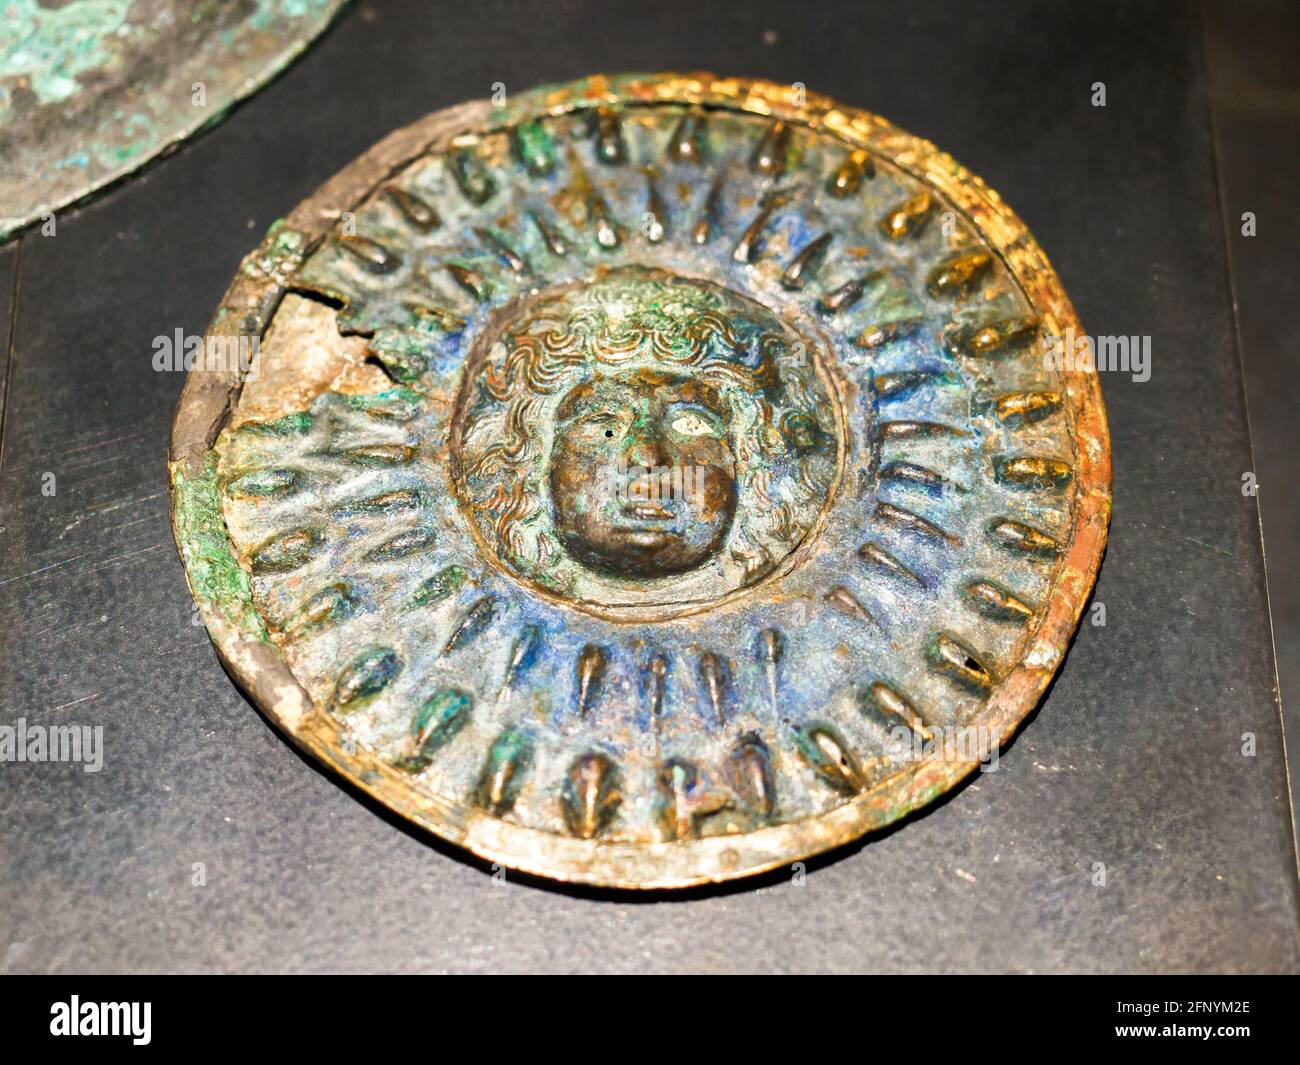 Silver mirror with bronze relief decoration depicting Medusa - Pompeii archaeological site, Italy Stock Photo